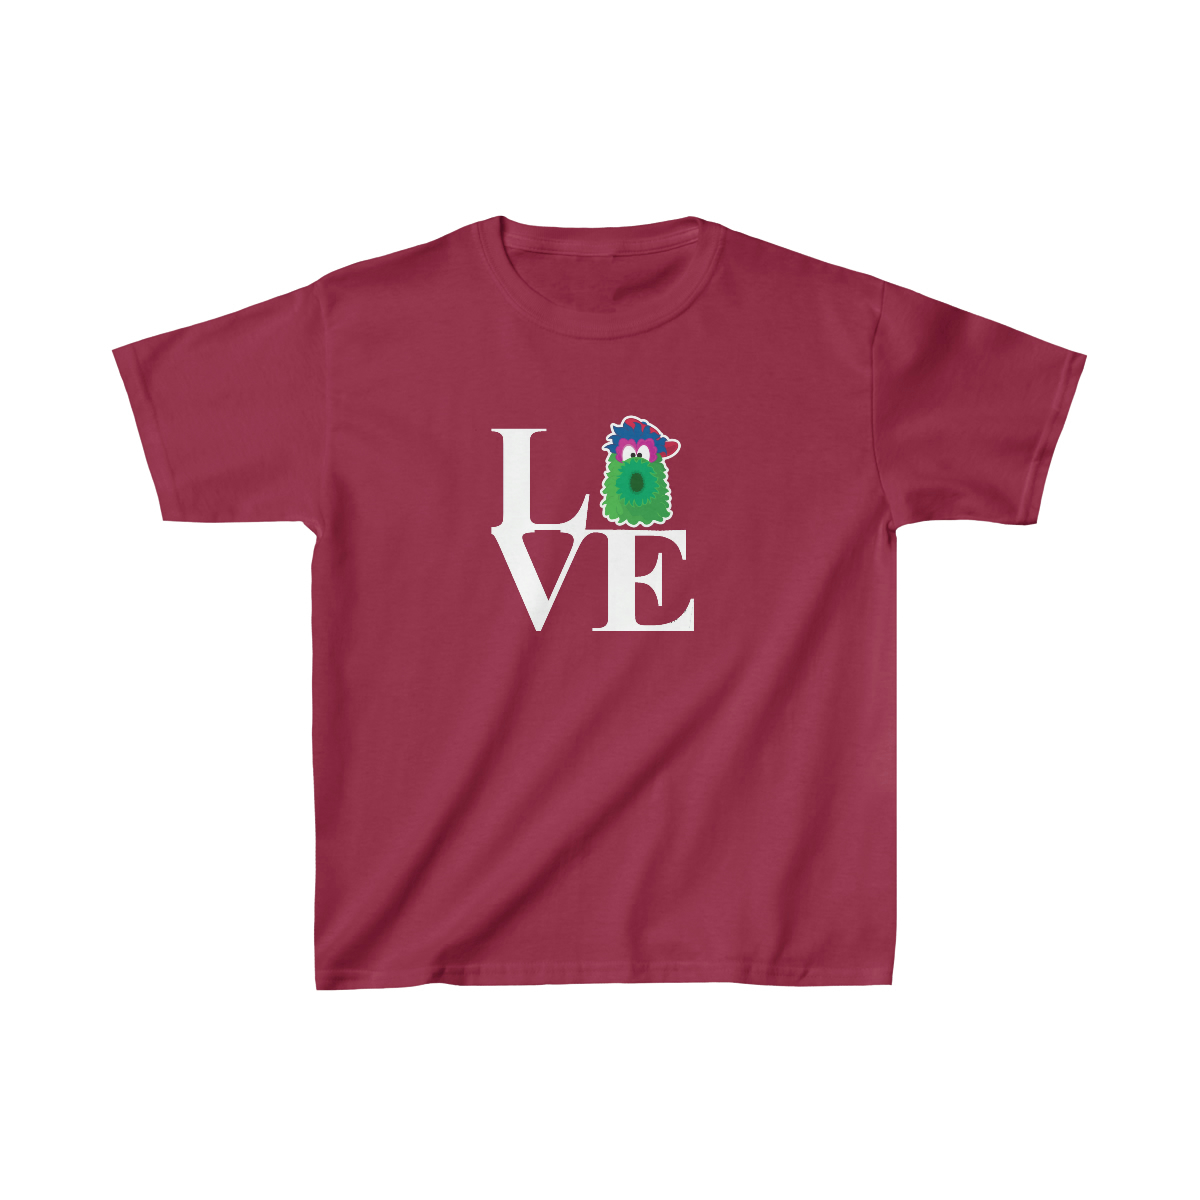 Phillies LOVE Shirts Kids - Section 419